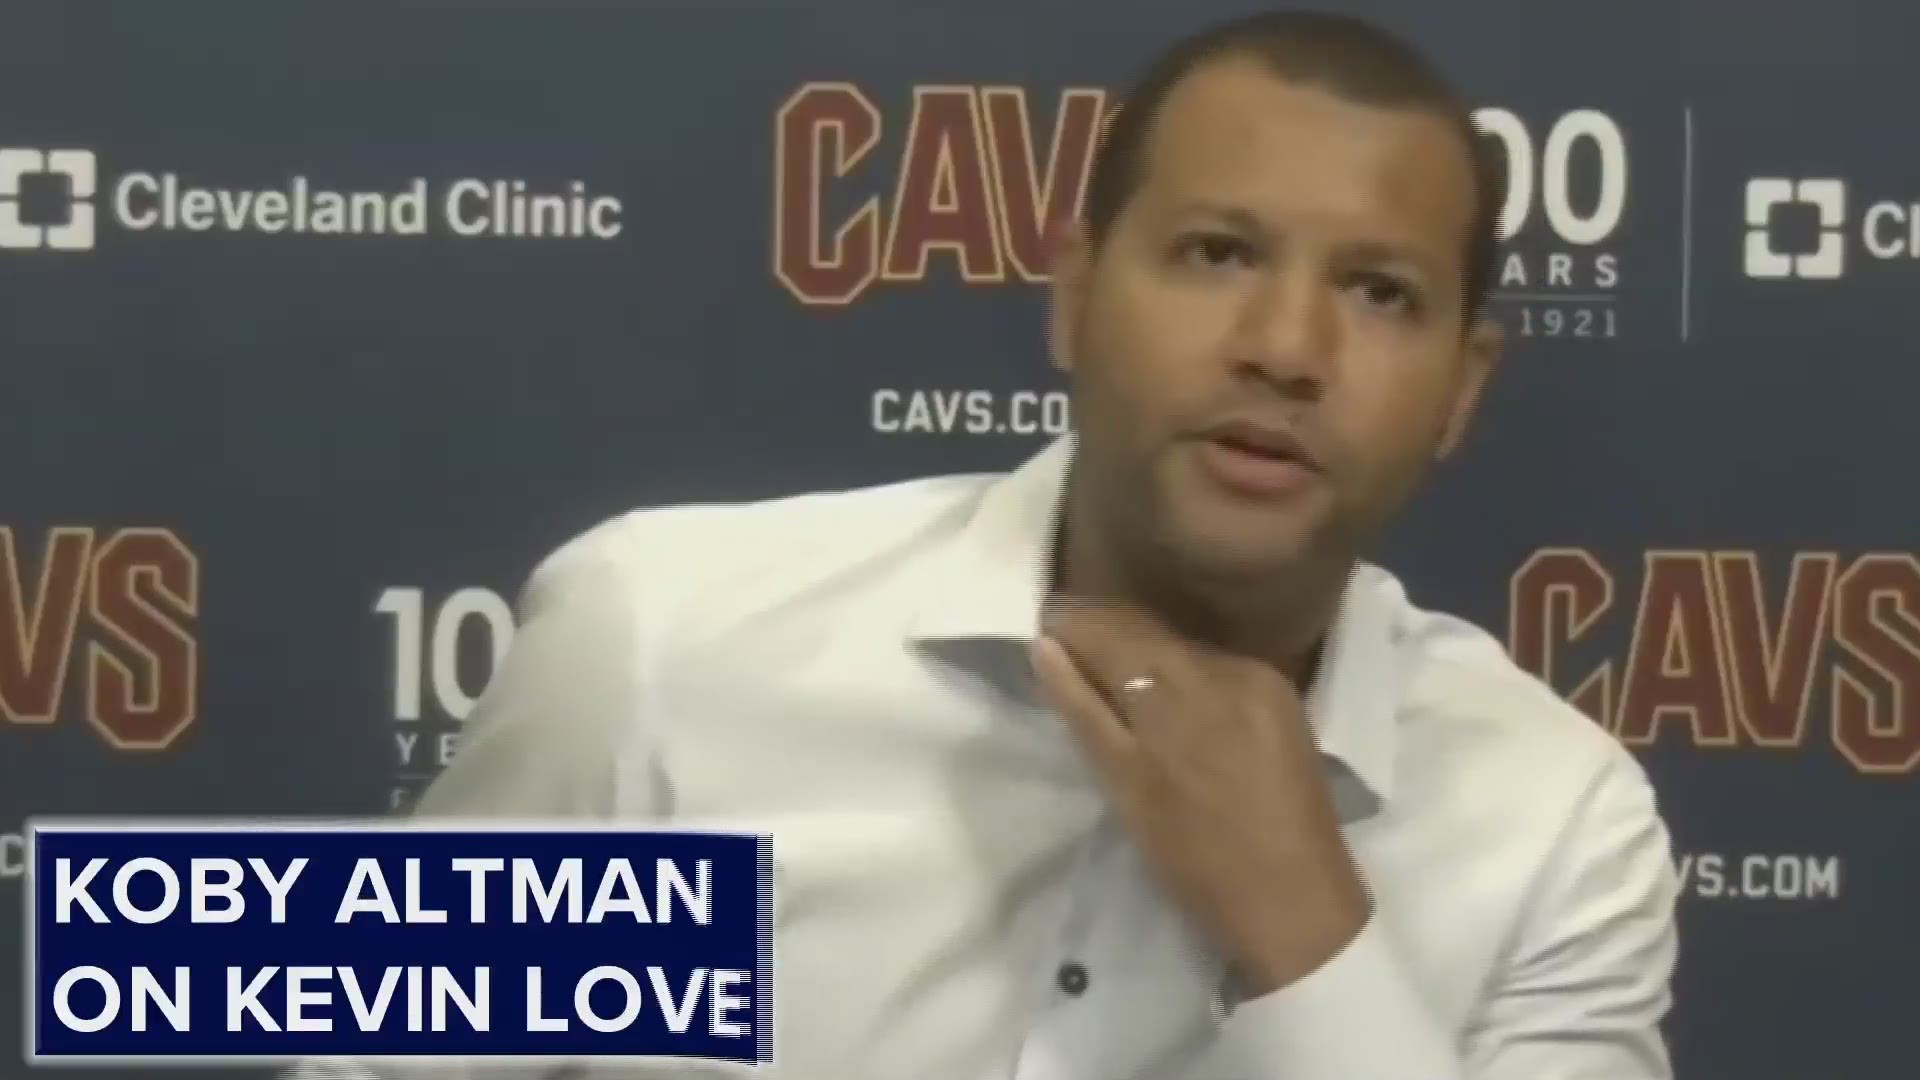 Cavaliers' General Manager Koby Altman discusses the future of Kevin Love in Cleveland.